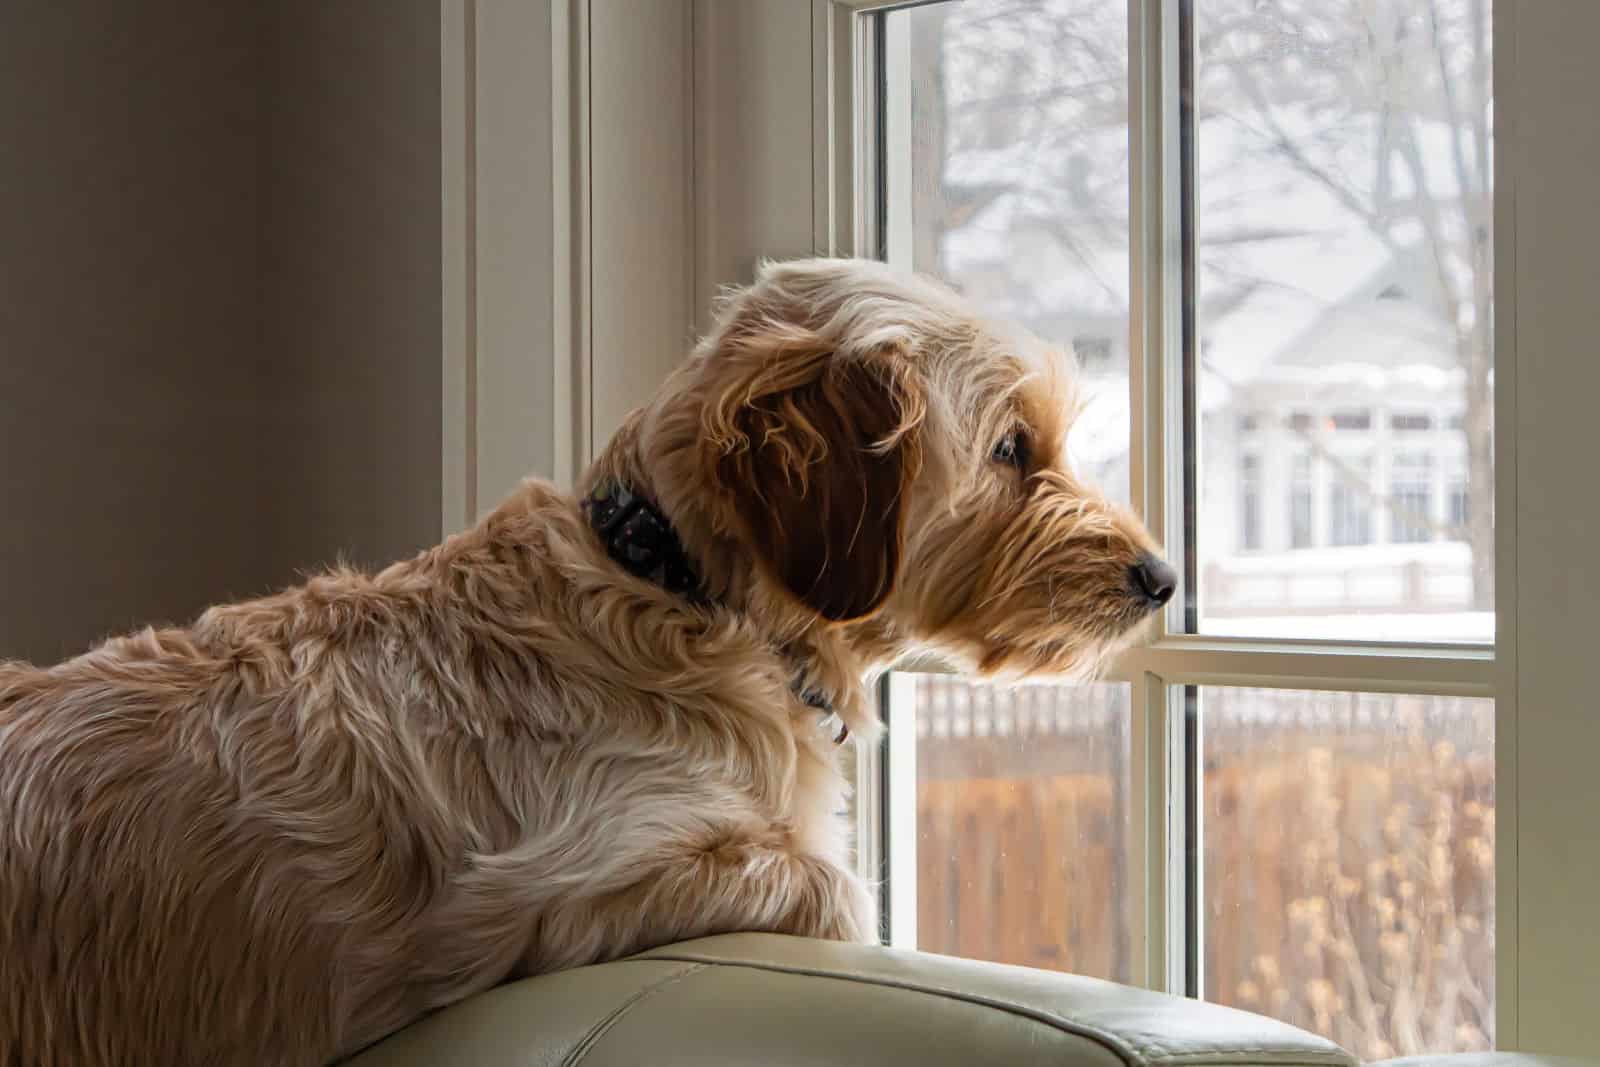 How Long Should You Leave Your Goldendoodle Alone?